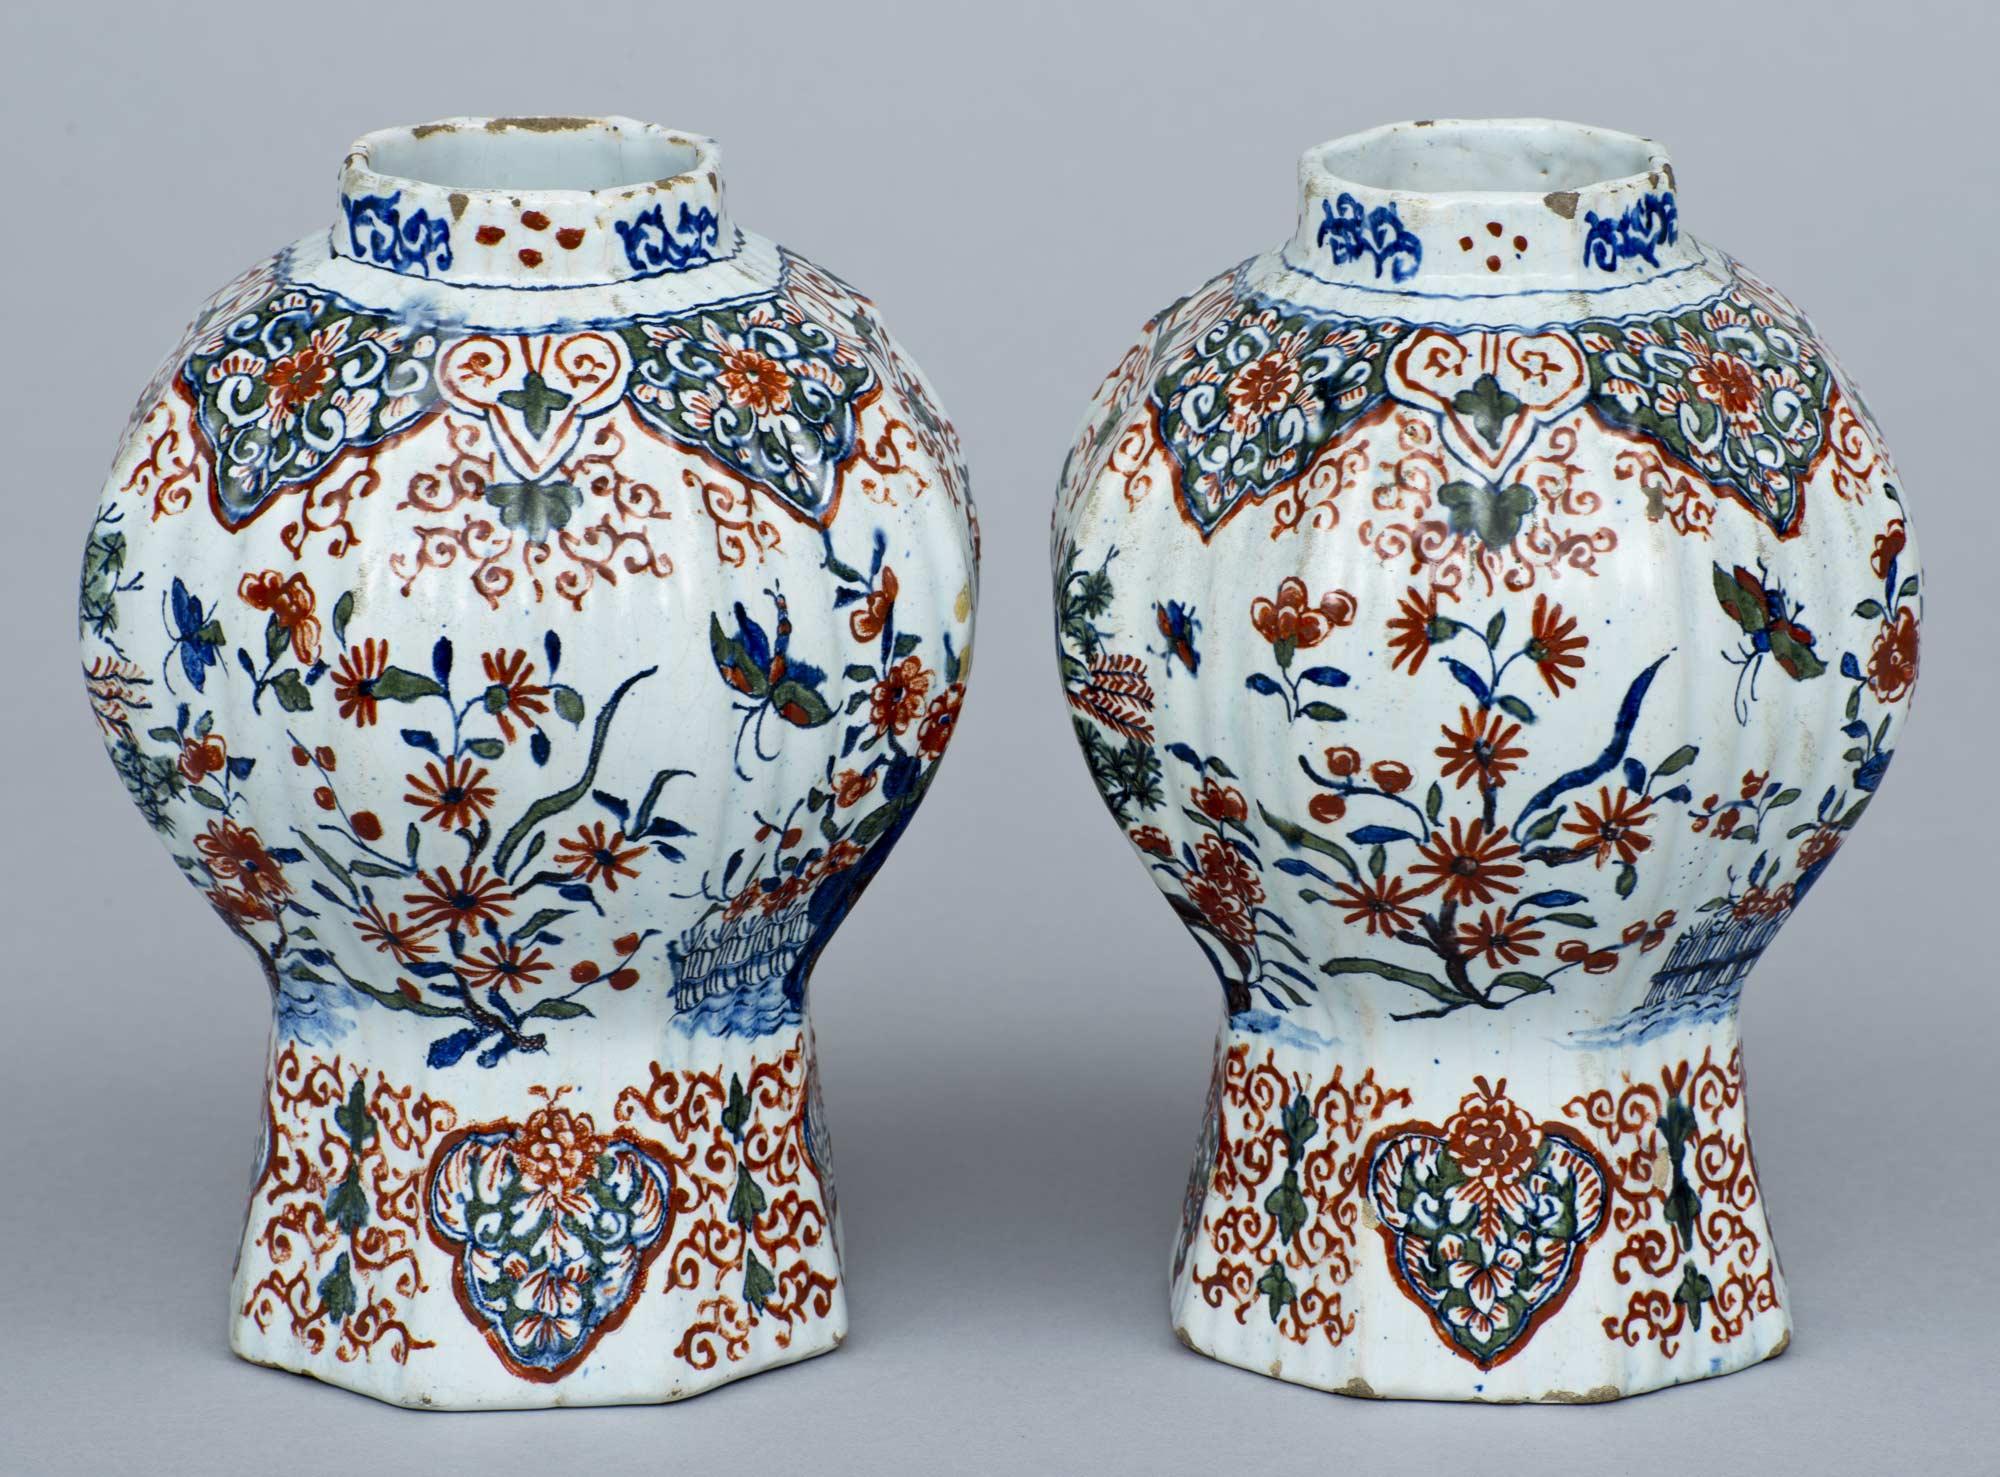 Pair of early delft octagonal and ribbed vases, polychrome decorated in iron red, blue and green with birds perched on branches, insects and flowers. The bottom painted in red “APK”: Adrian Pynacker.